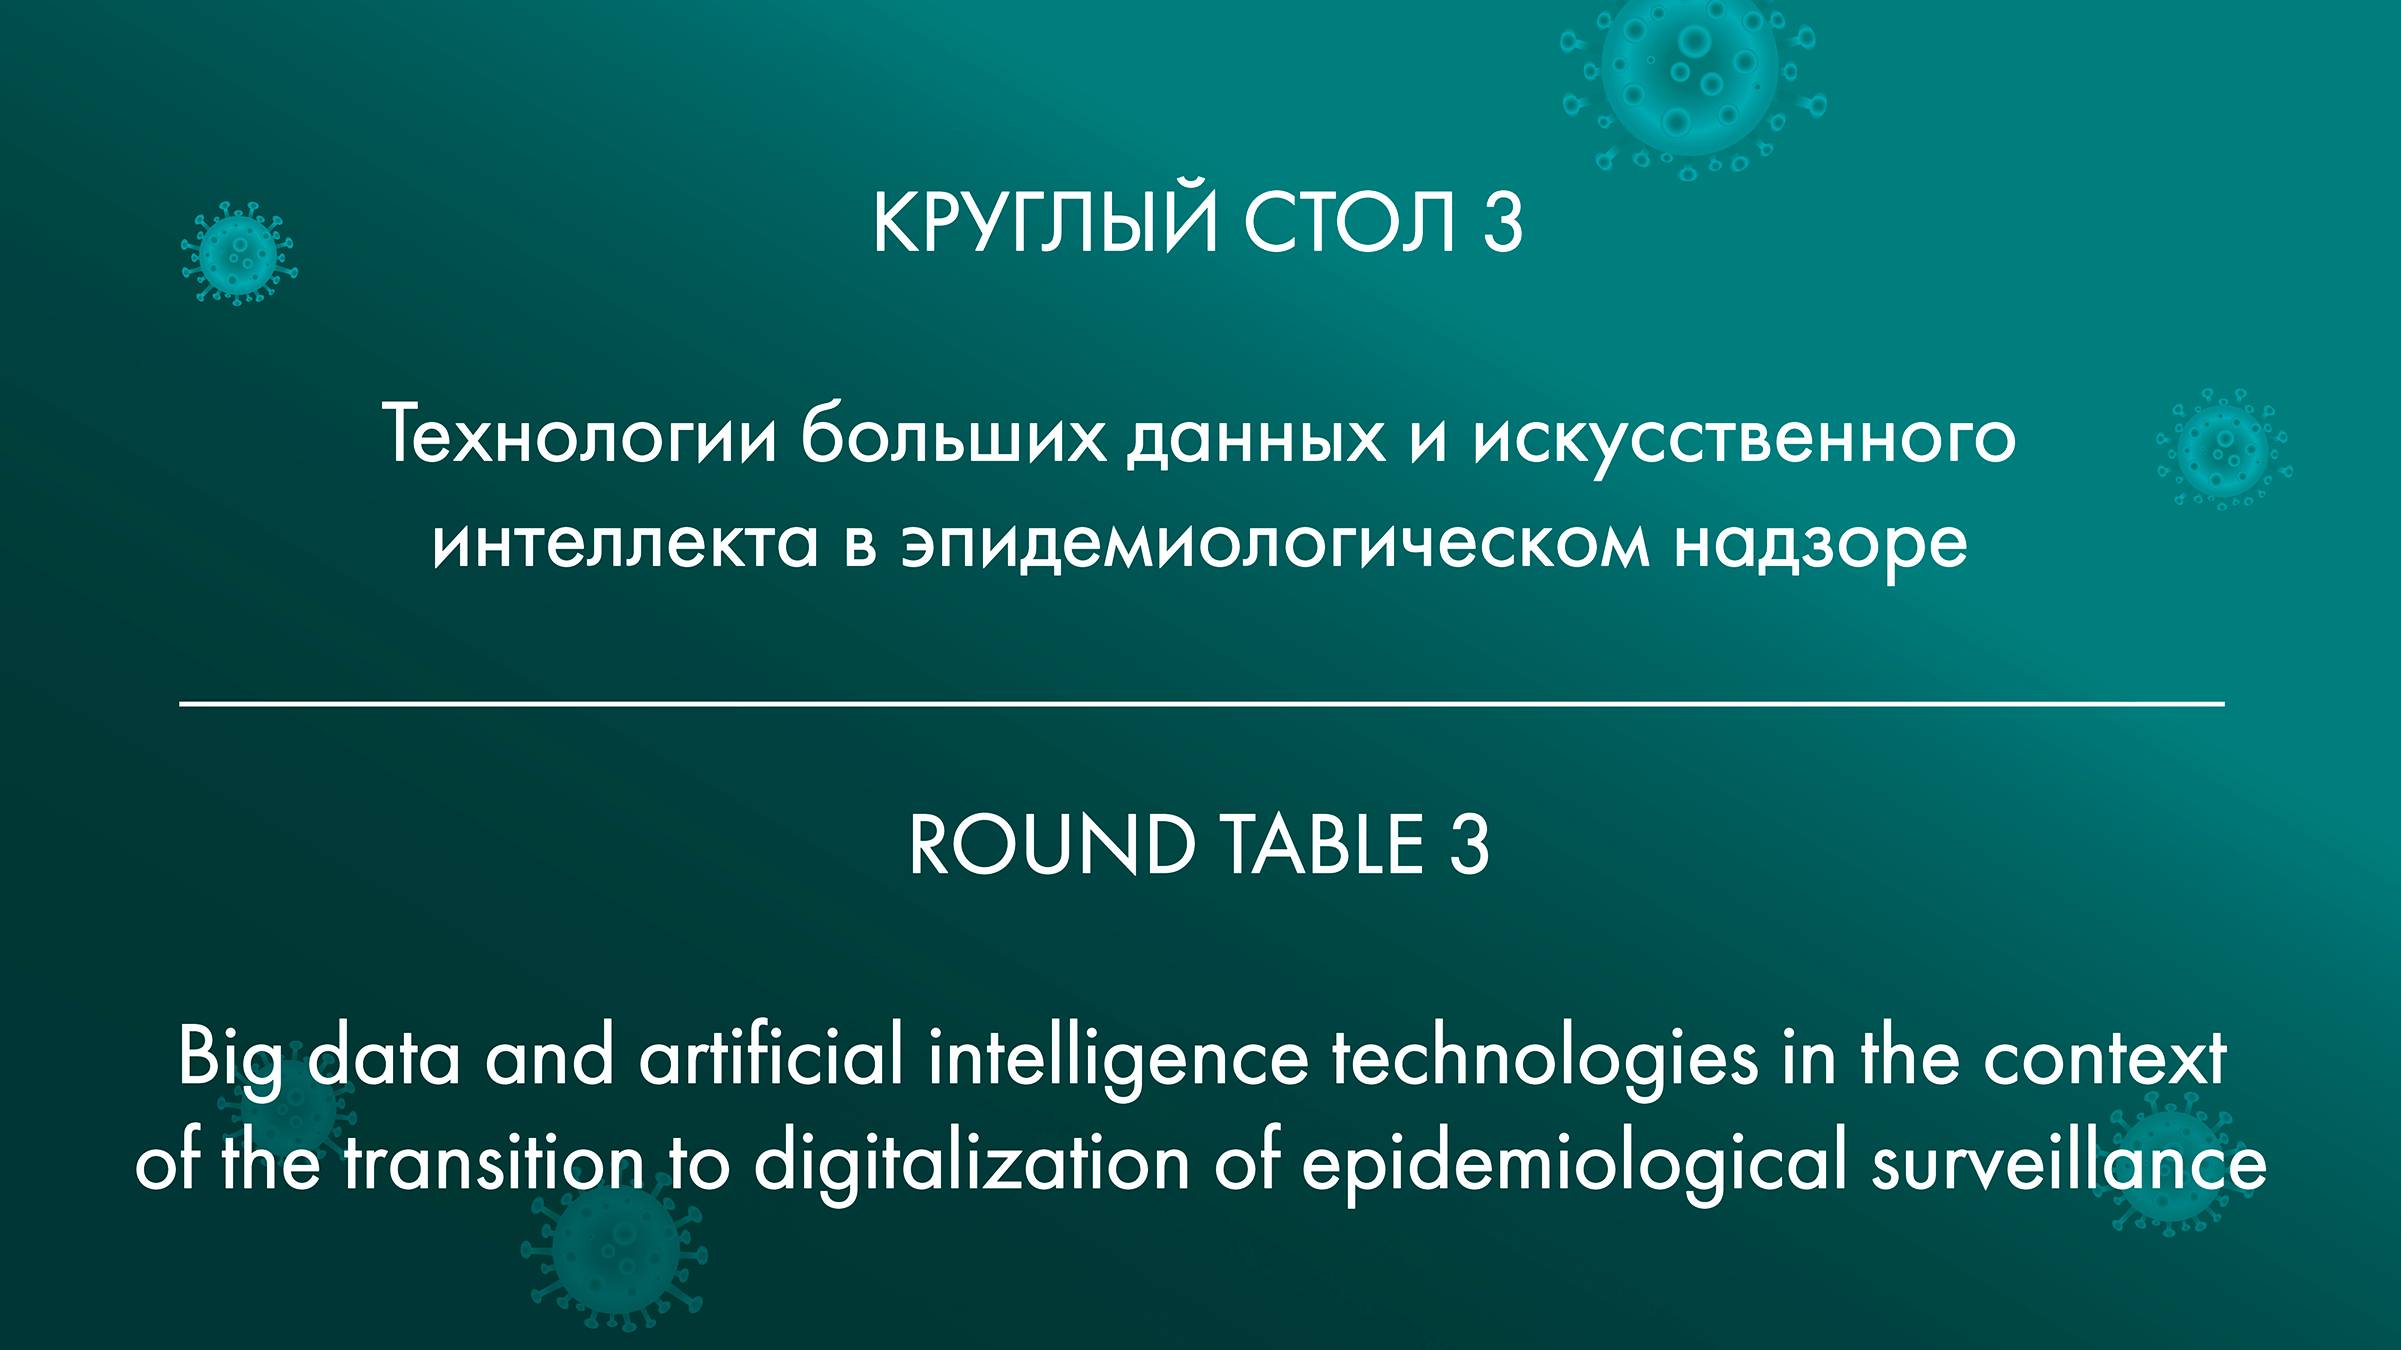 ROUND TABLE 3 Big data and artificial intelligence